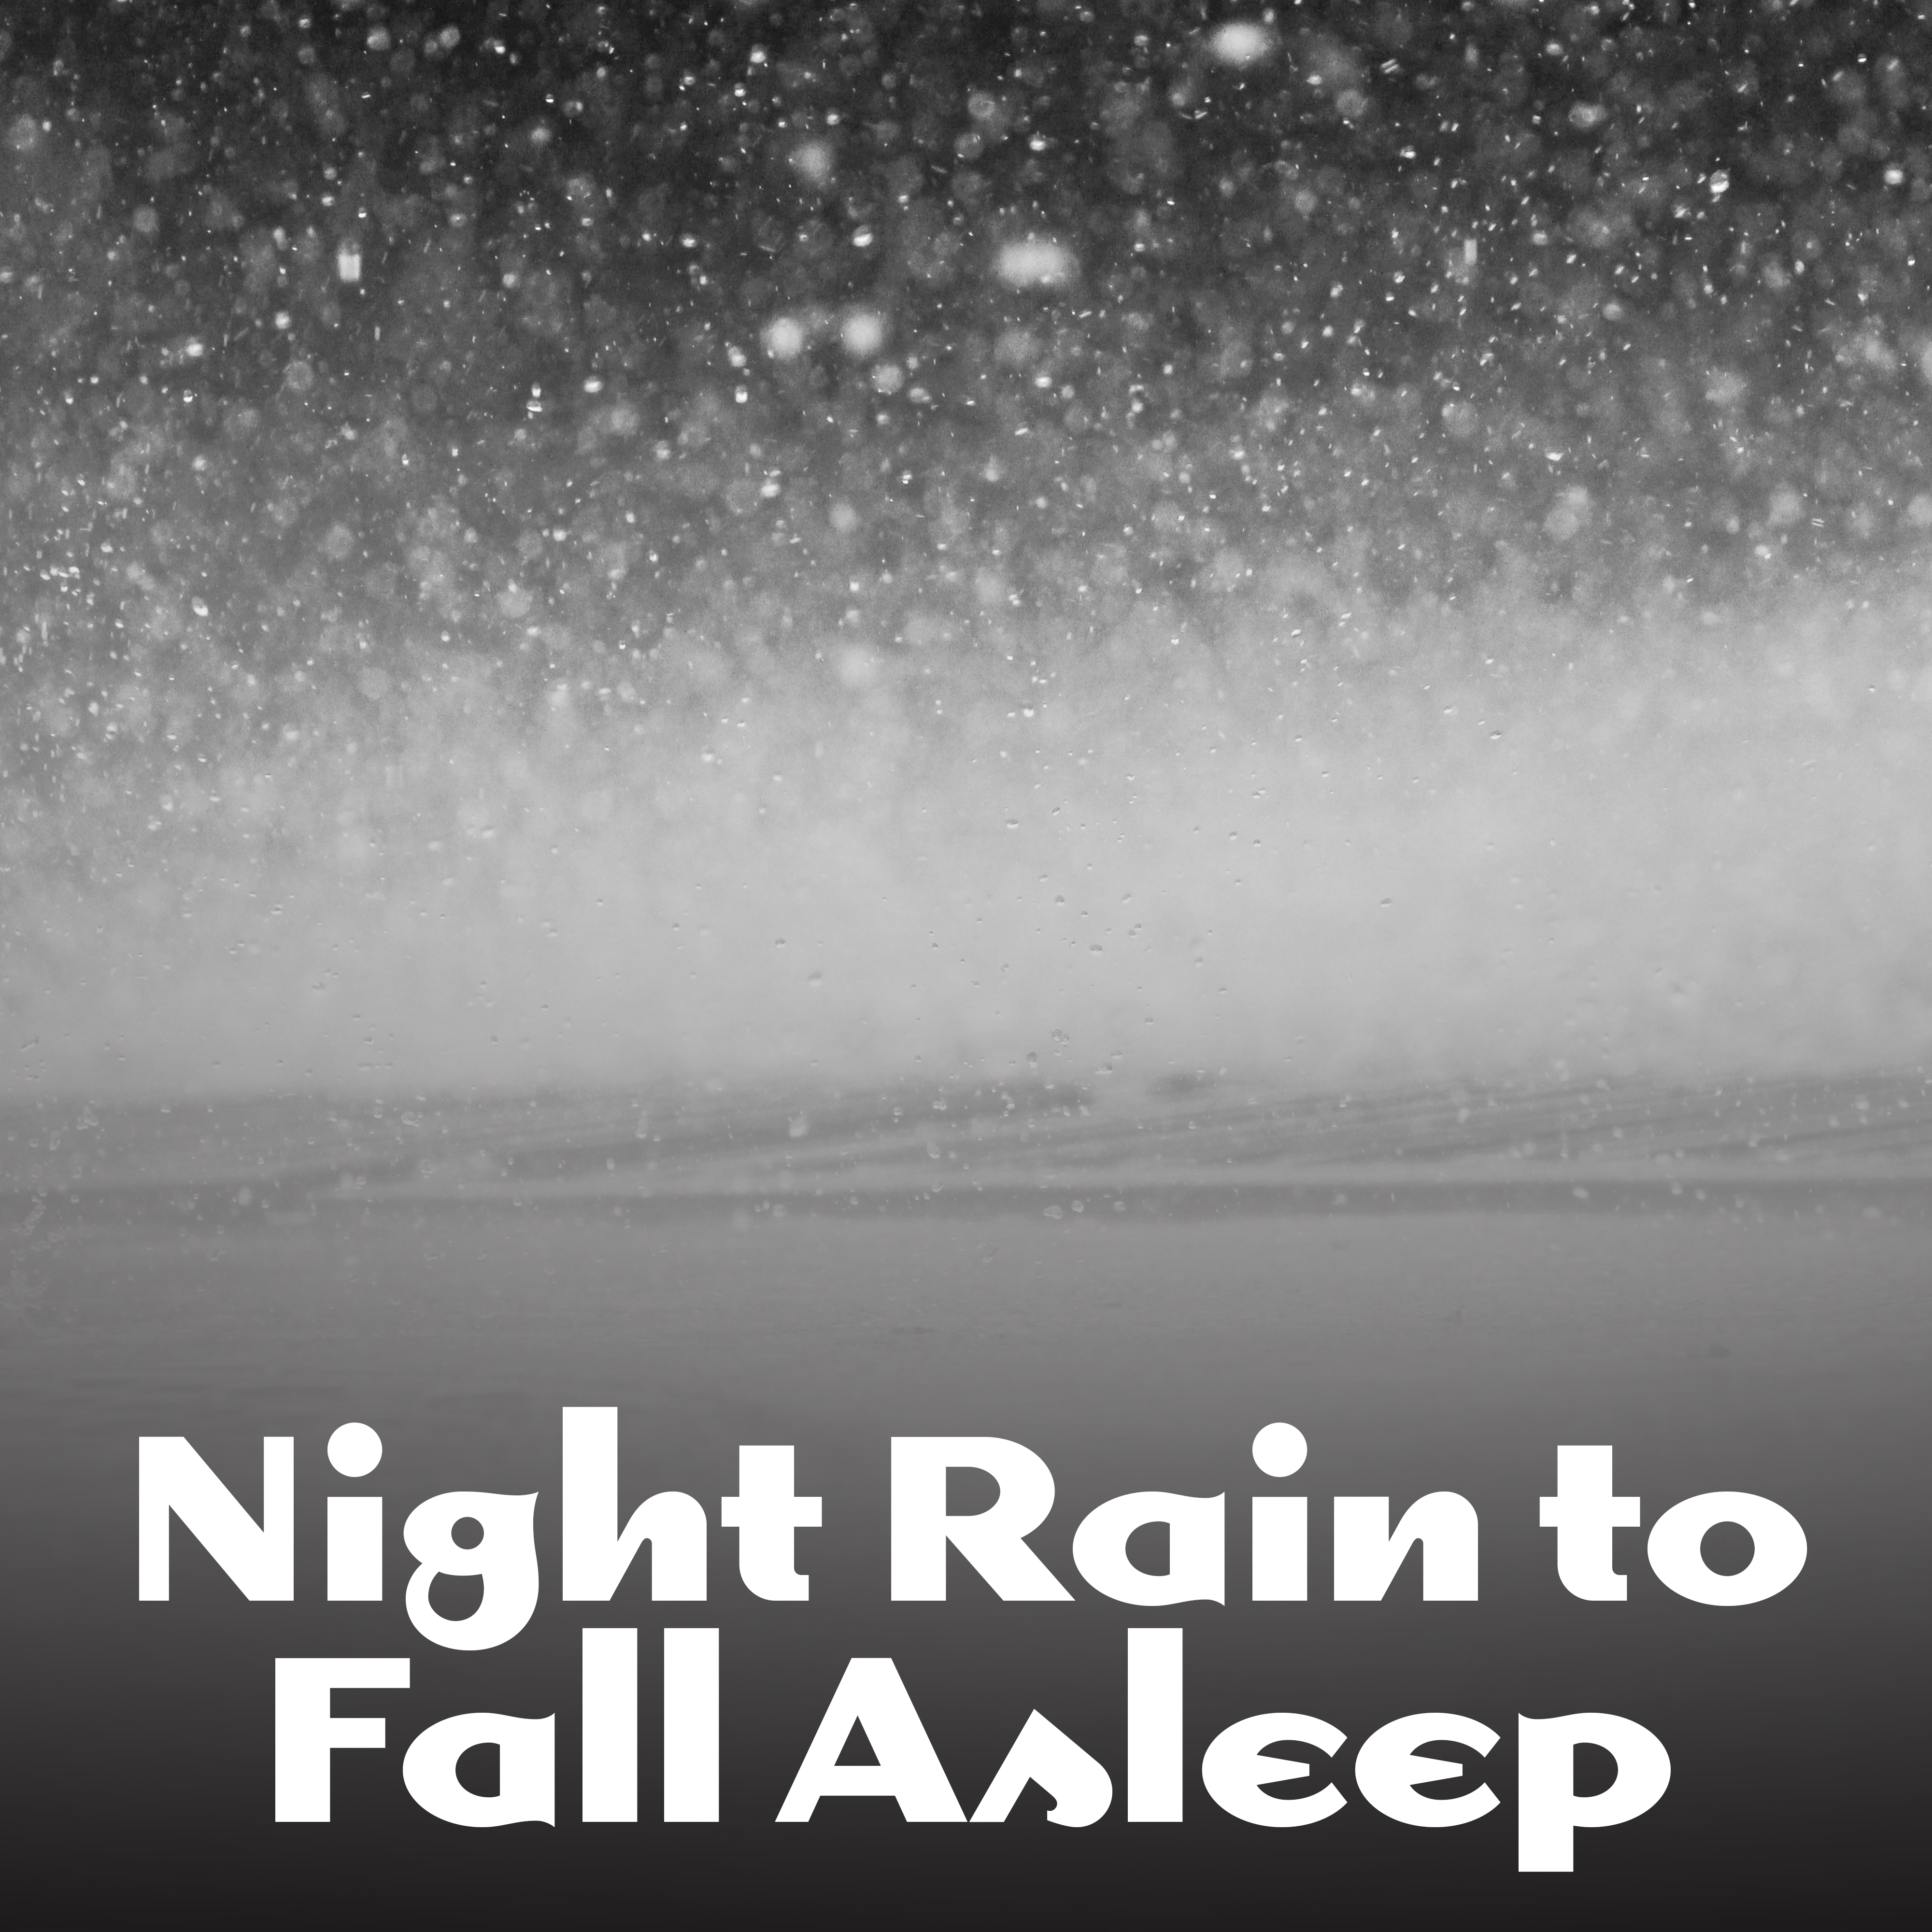 Night Rain to Fall Asleep  Calming Nature Waves, Easy Relaxation, Music to Calm Down, Sleep Well with New Age